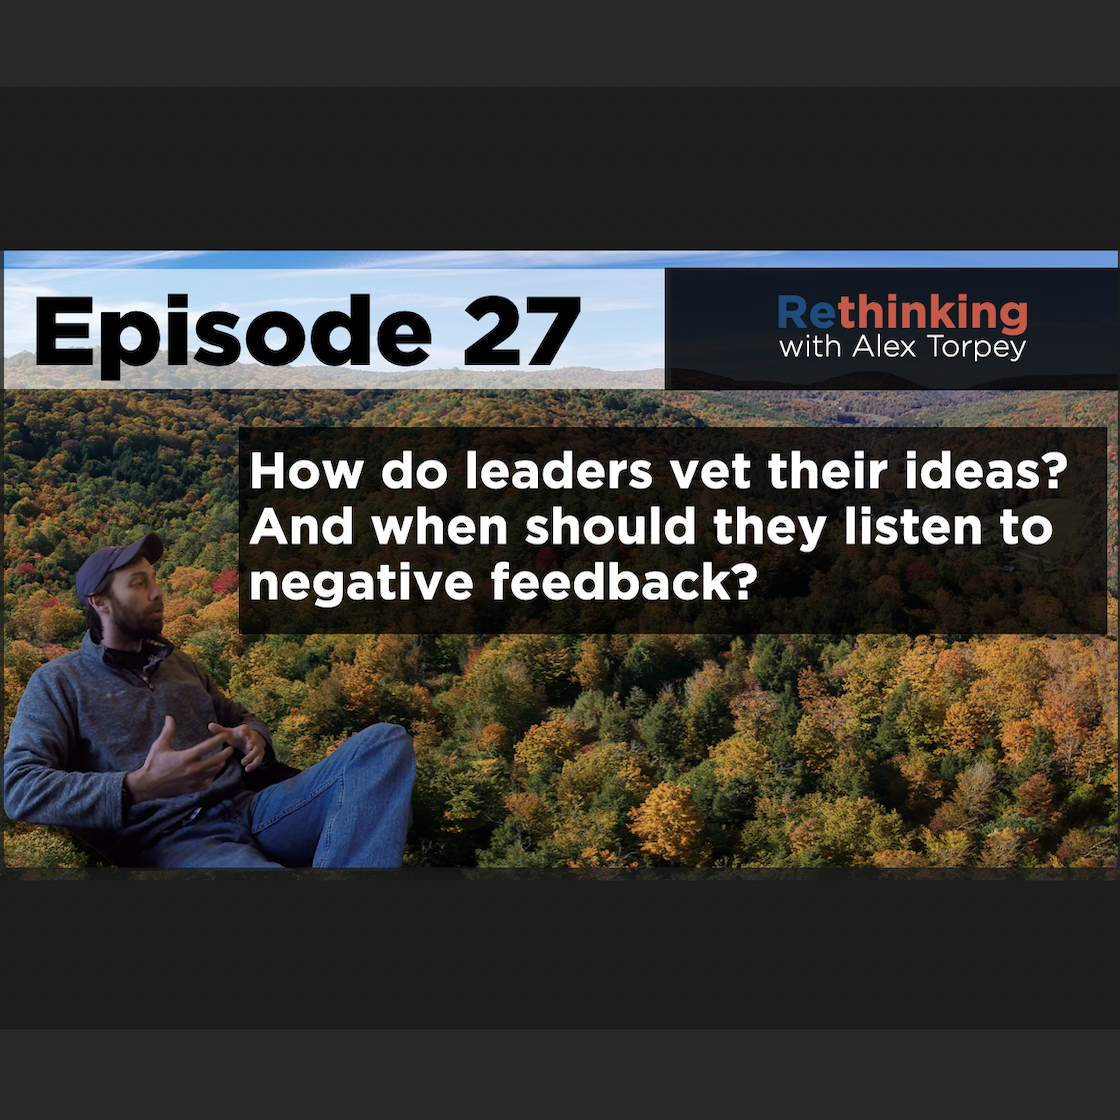 Ep #27 - How do leaders vet ideas? When should you listen to negative feedback?